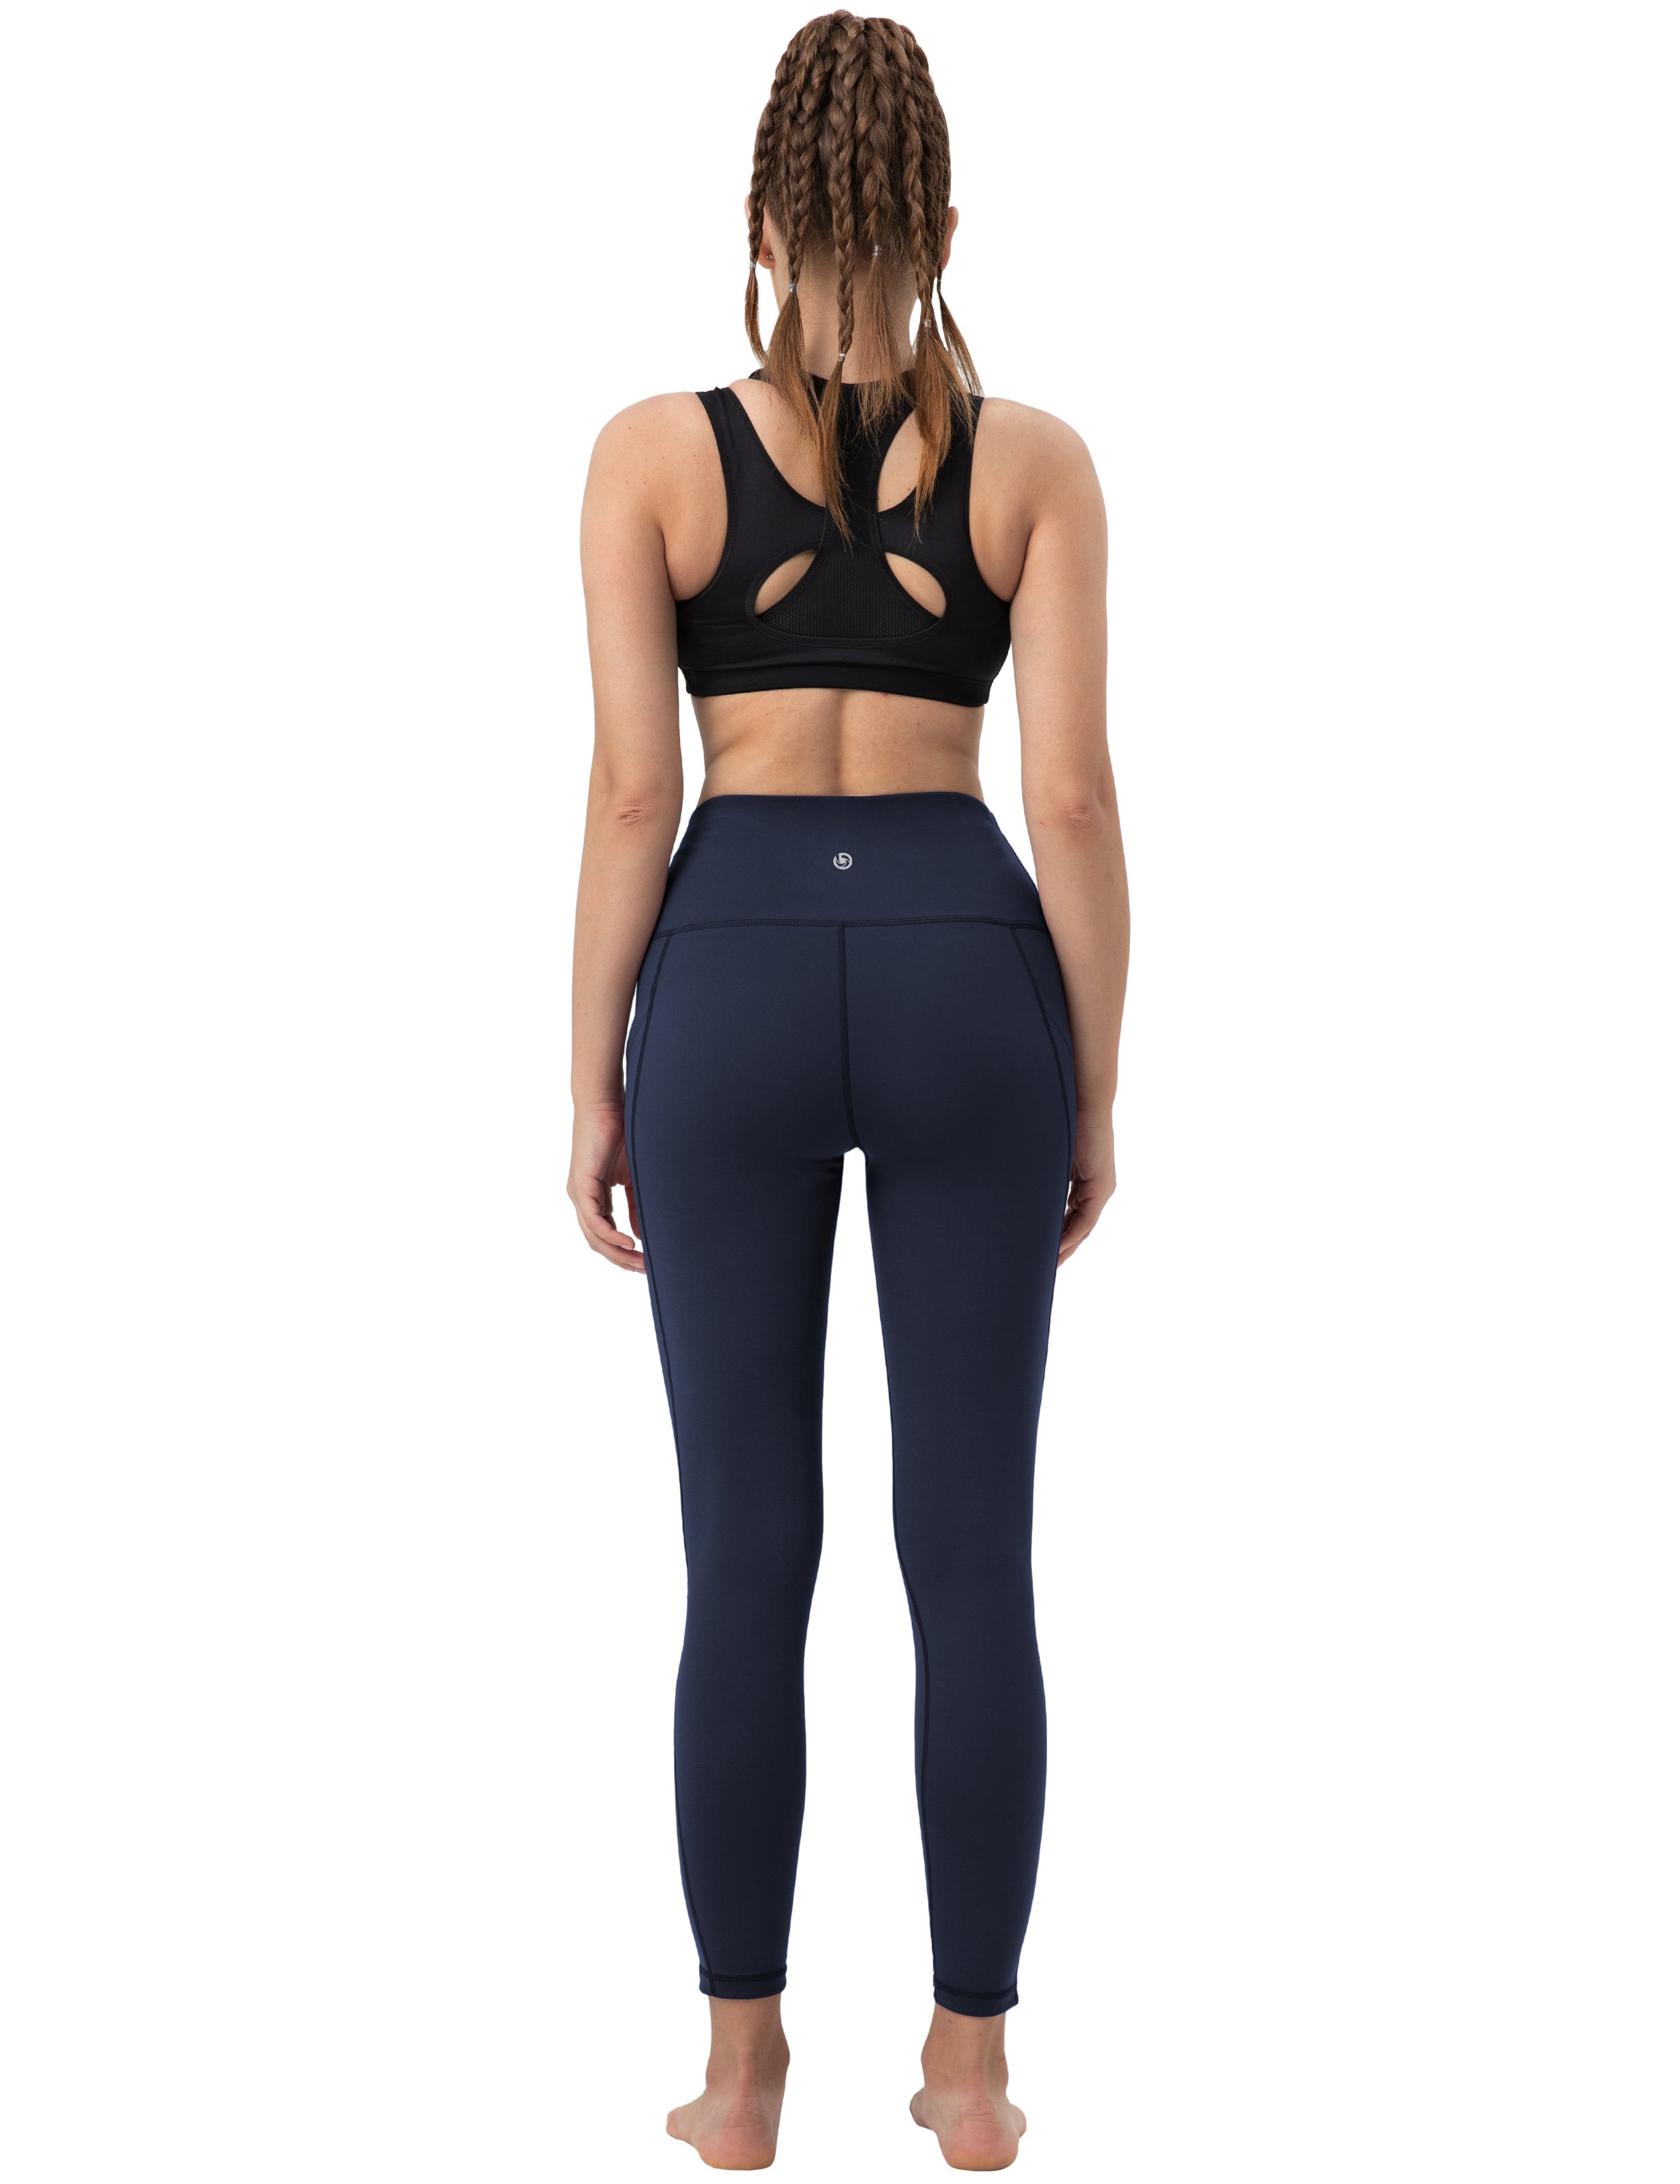 High Waist Side Pockets Jogging Pants darknavy 75% Nylon, 25% Spandex Fabric doesn't attract lint easily 4-way stretch No see-through Moisture-wicking Tummy control Inner pocket